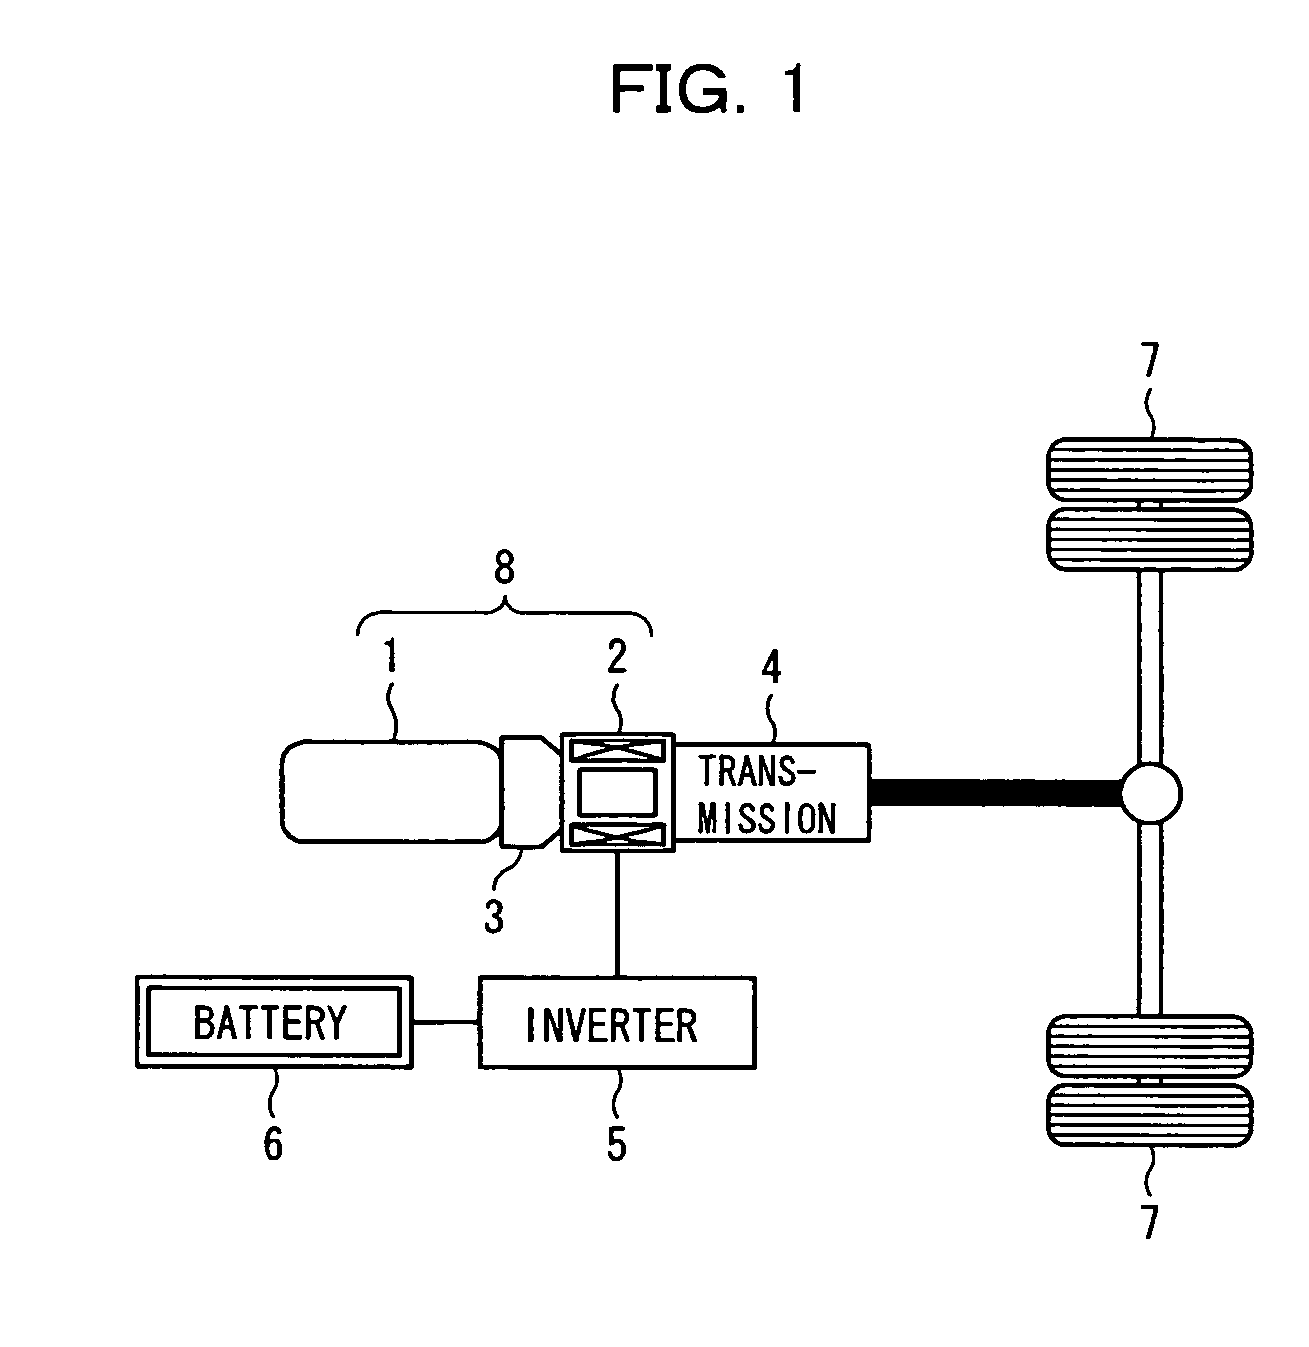 Motor control apparatus for a hybrid vehicle